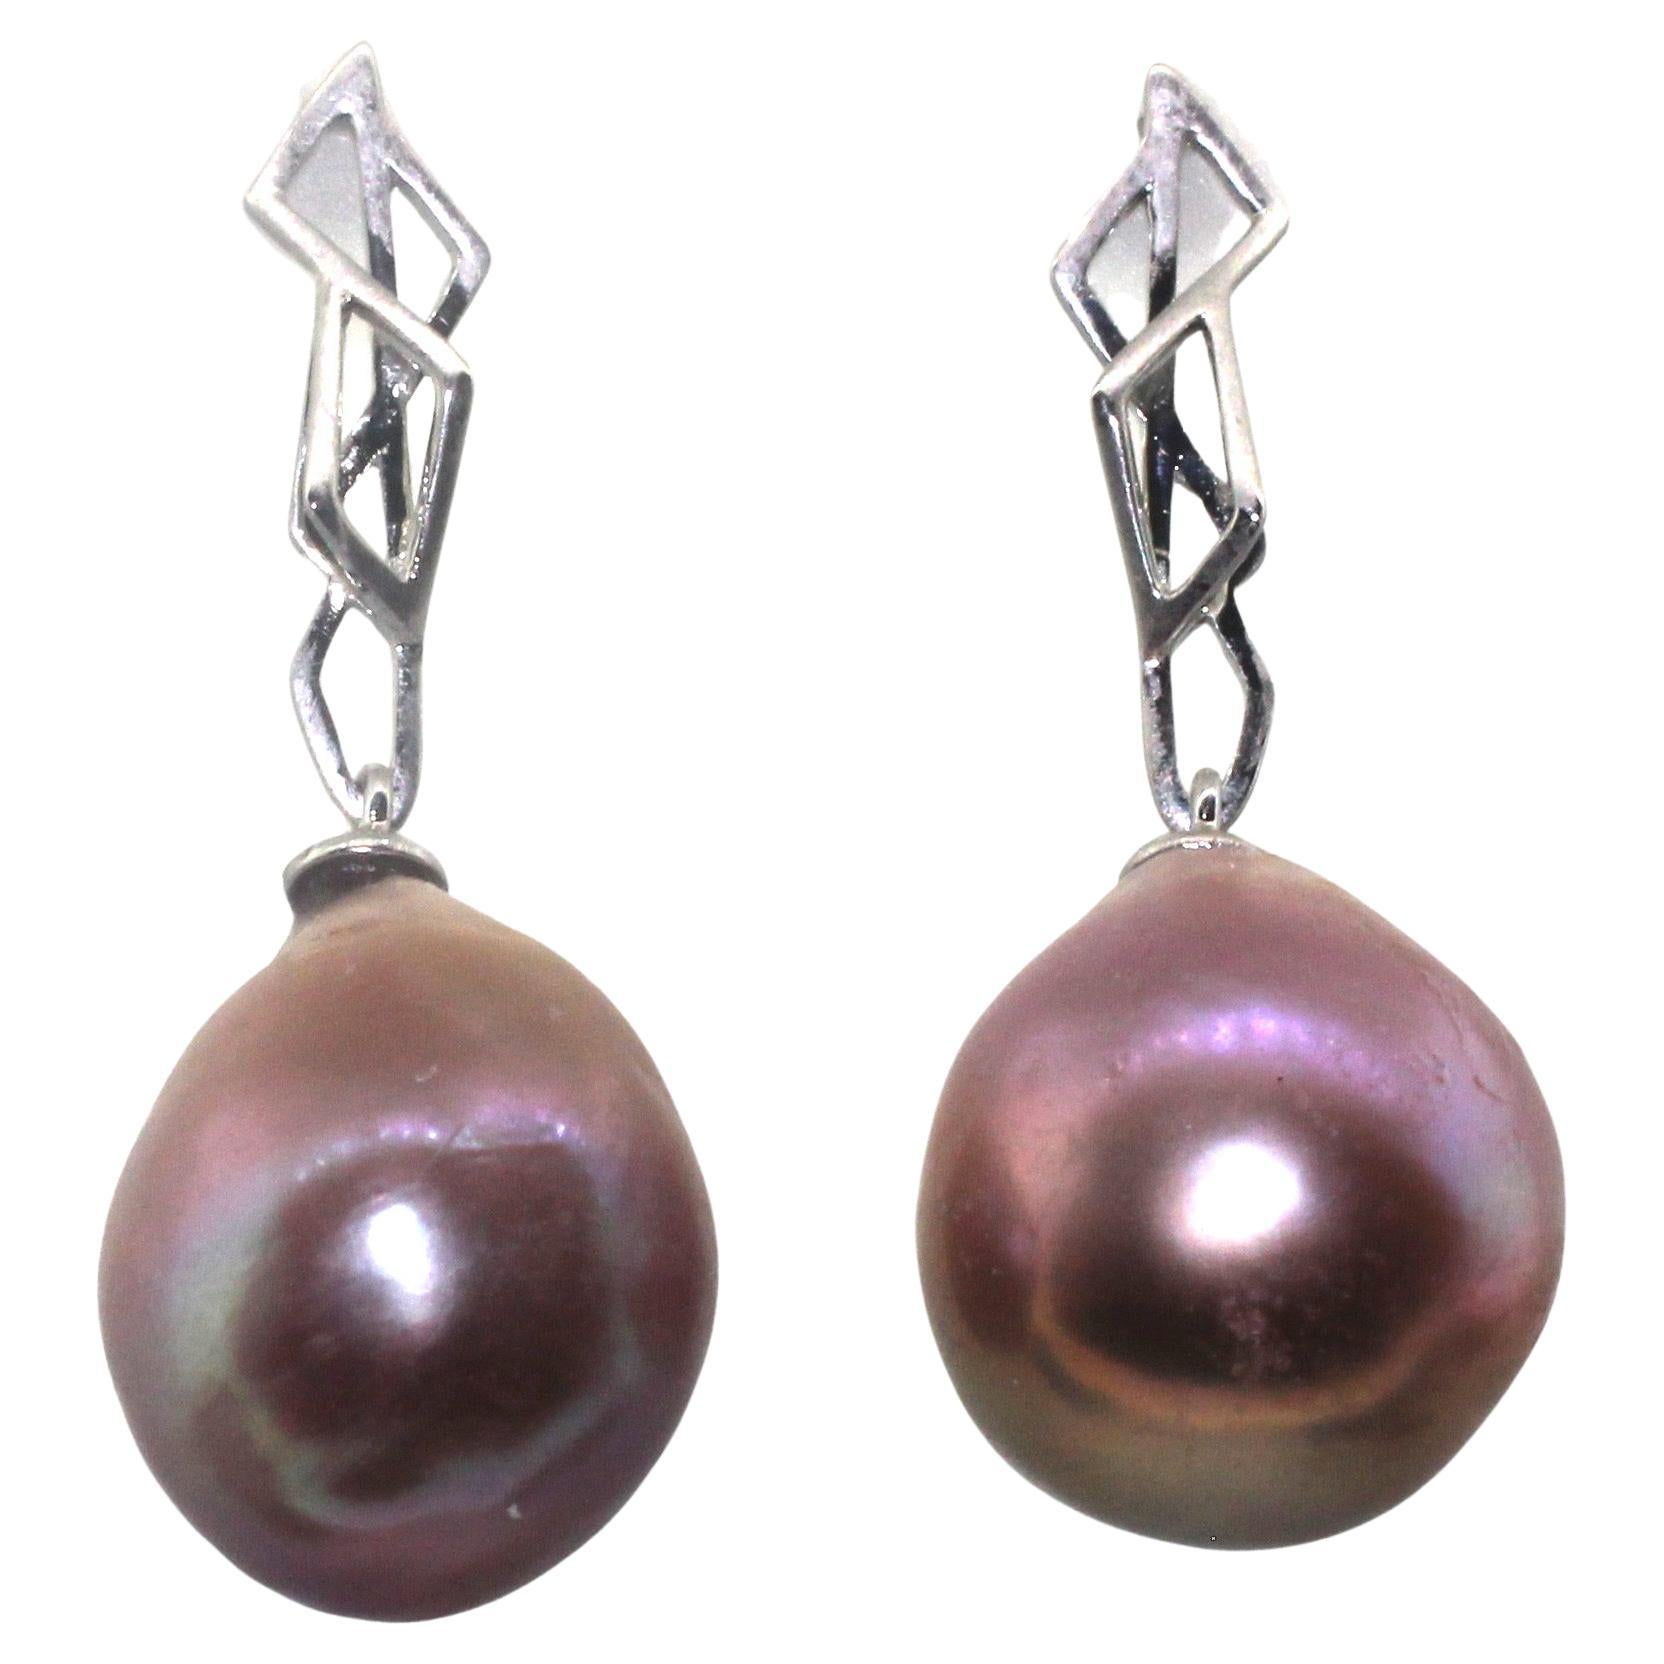 Hakimoto By Jewel Of Ocean
18K White Gold
Total item weight 8 grams
16x13 mm Cultured Baroque Cultured Pearls
18K White Gold High Polish
Orient: Very Good
Luster: Very Good
Nacre: Very Good
Manufacture Suggested Retail Price $2,000